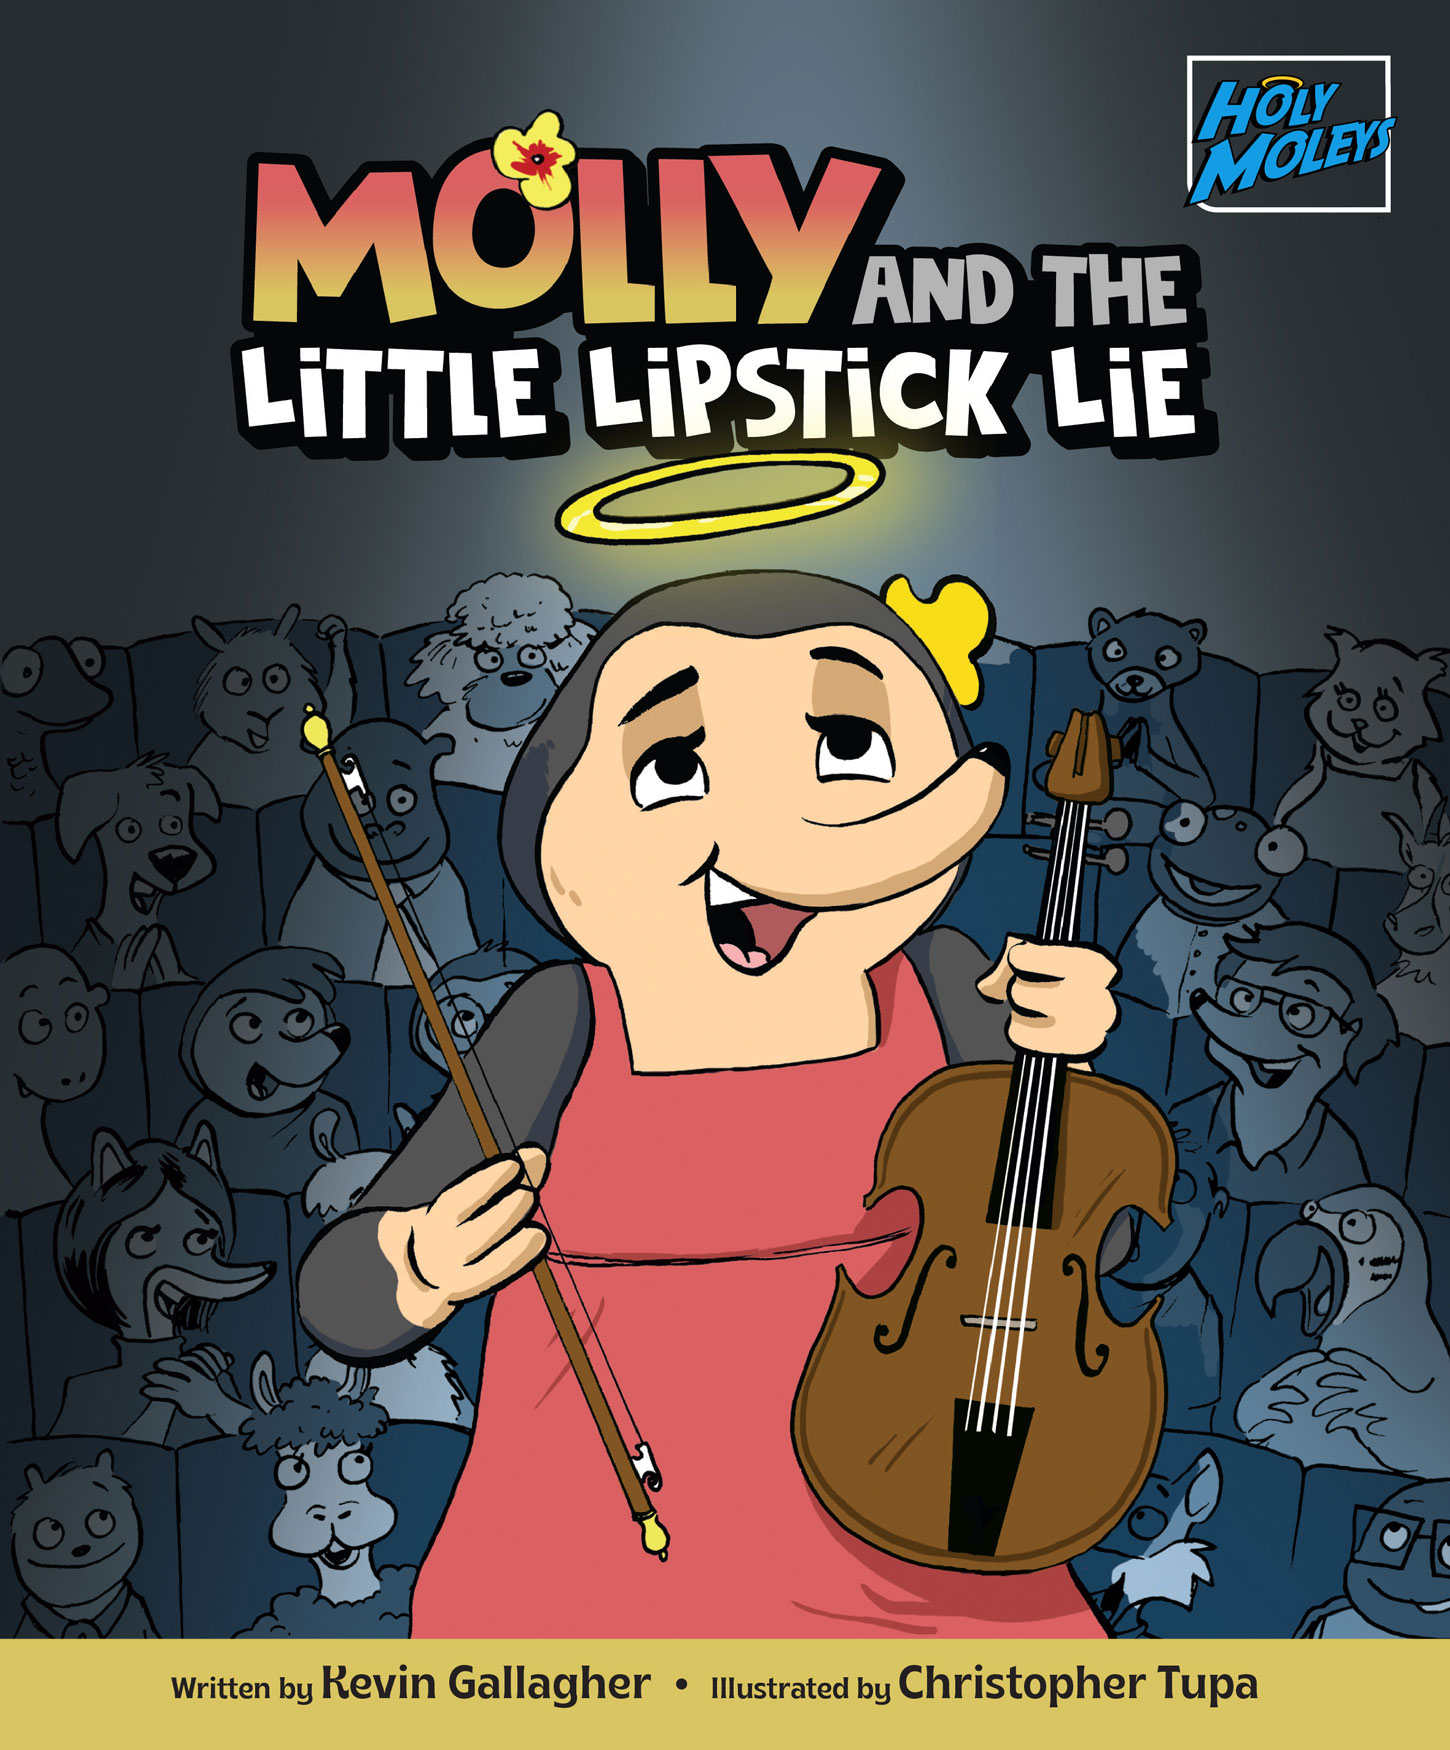 Molly and the Little Lipstick Lie / Holy Moleys Series / Kevin Gallagher